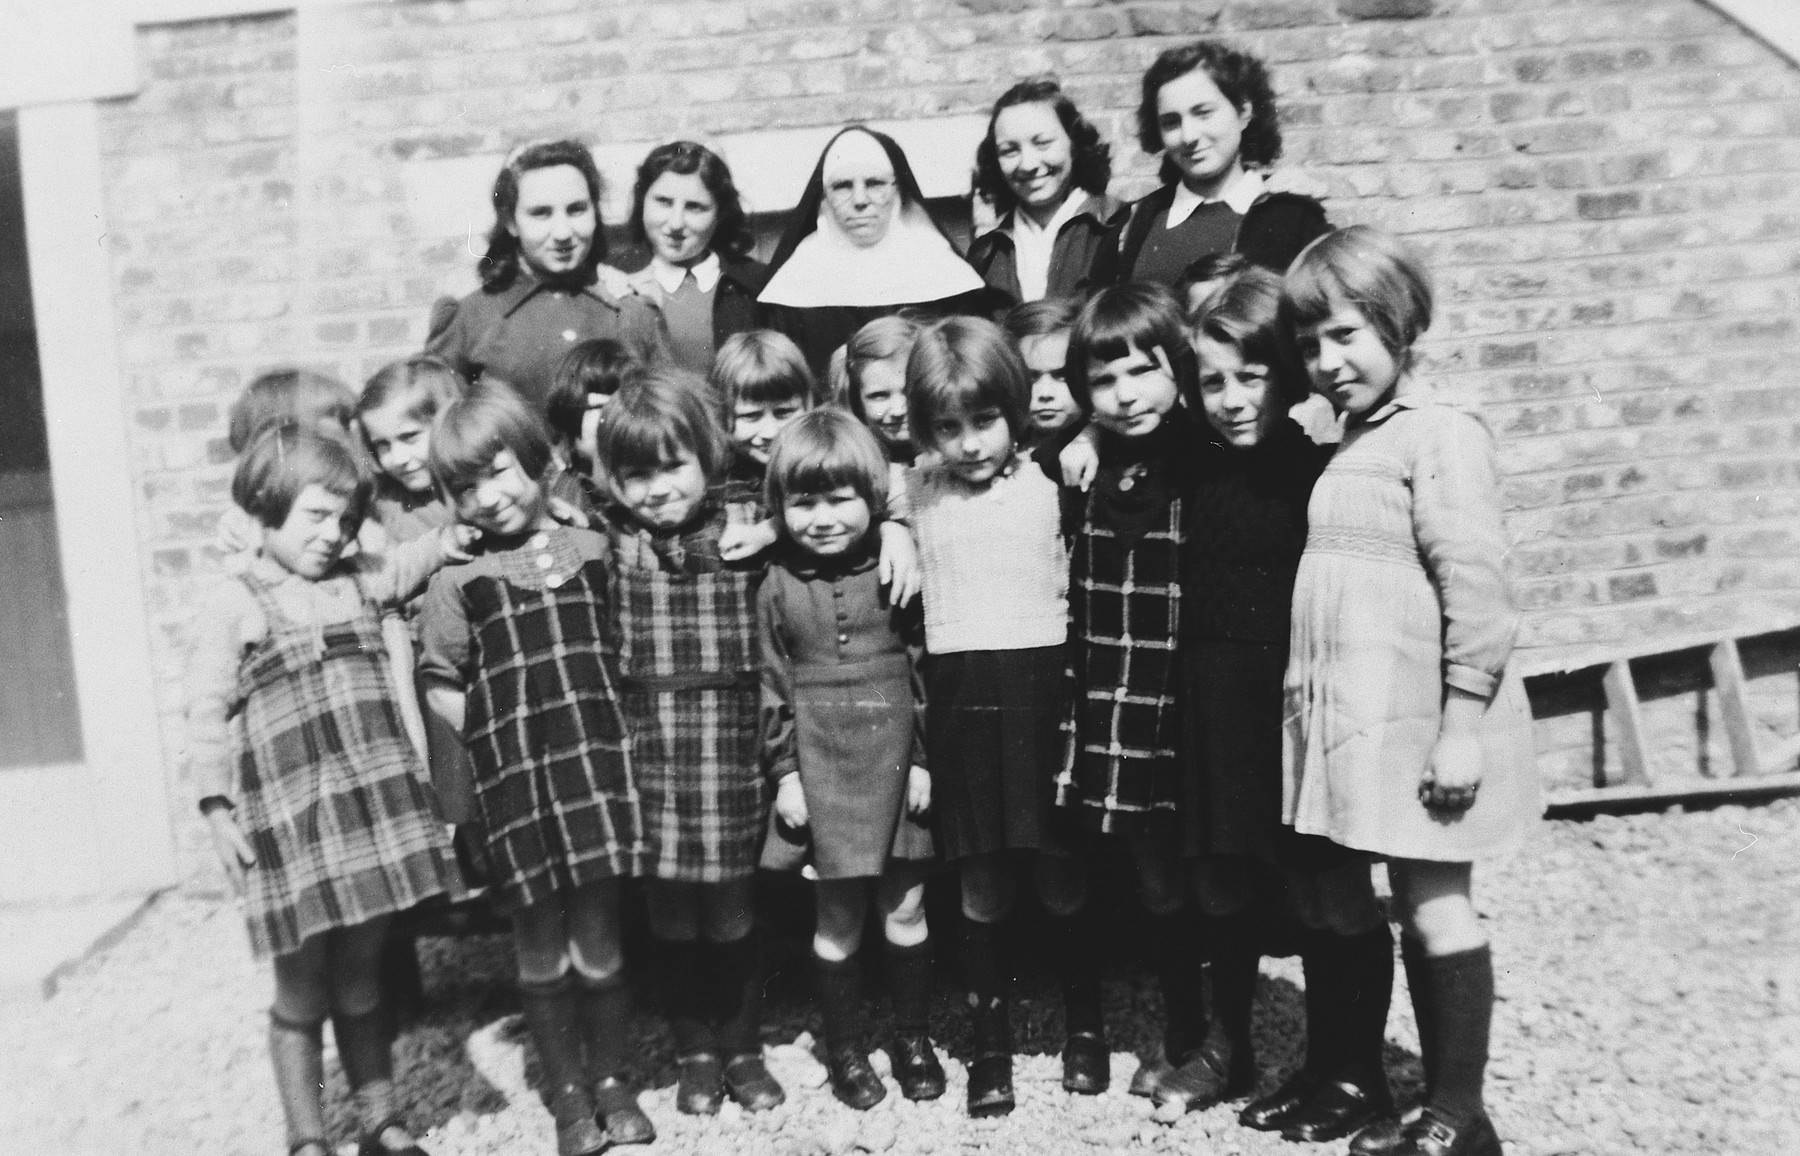 Two Jewish sisters pose with the nun who had hidden them and a group of Belgian children in the Couvent de la Misericorde in Louvain.

Pictured in the back row are Cecile and Anny Rojer and Sister Clotilde.